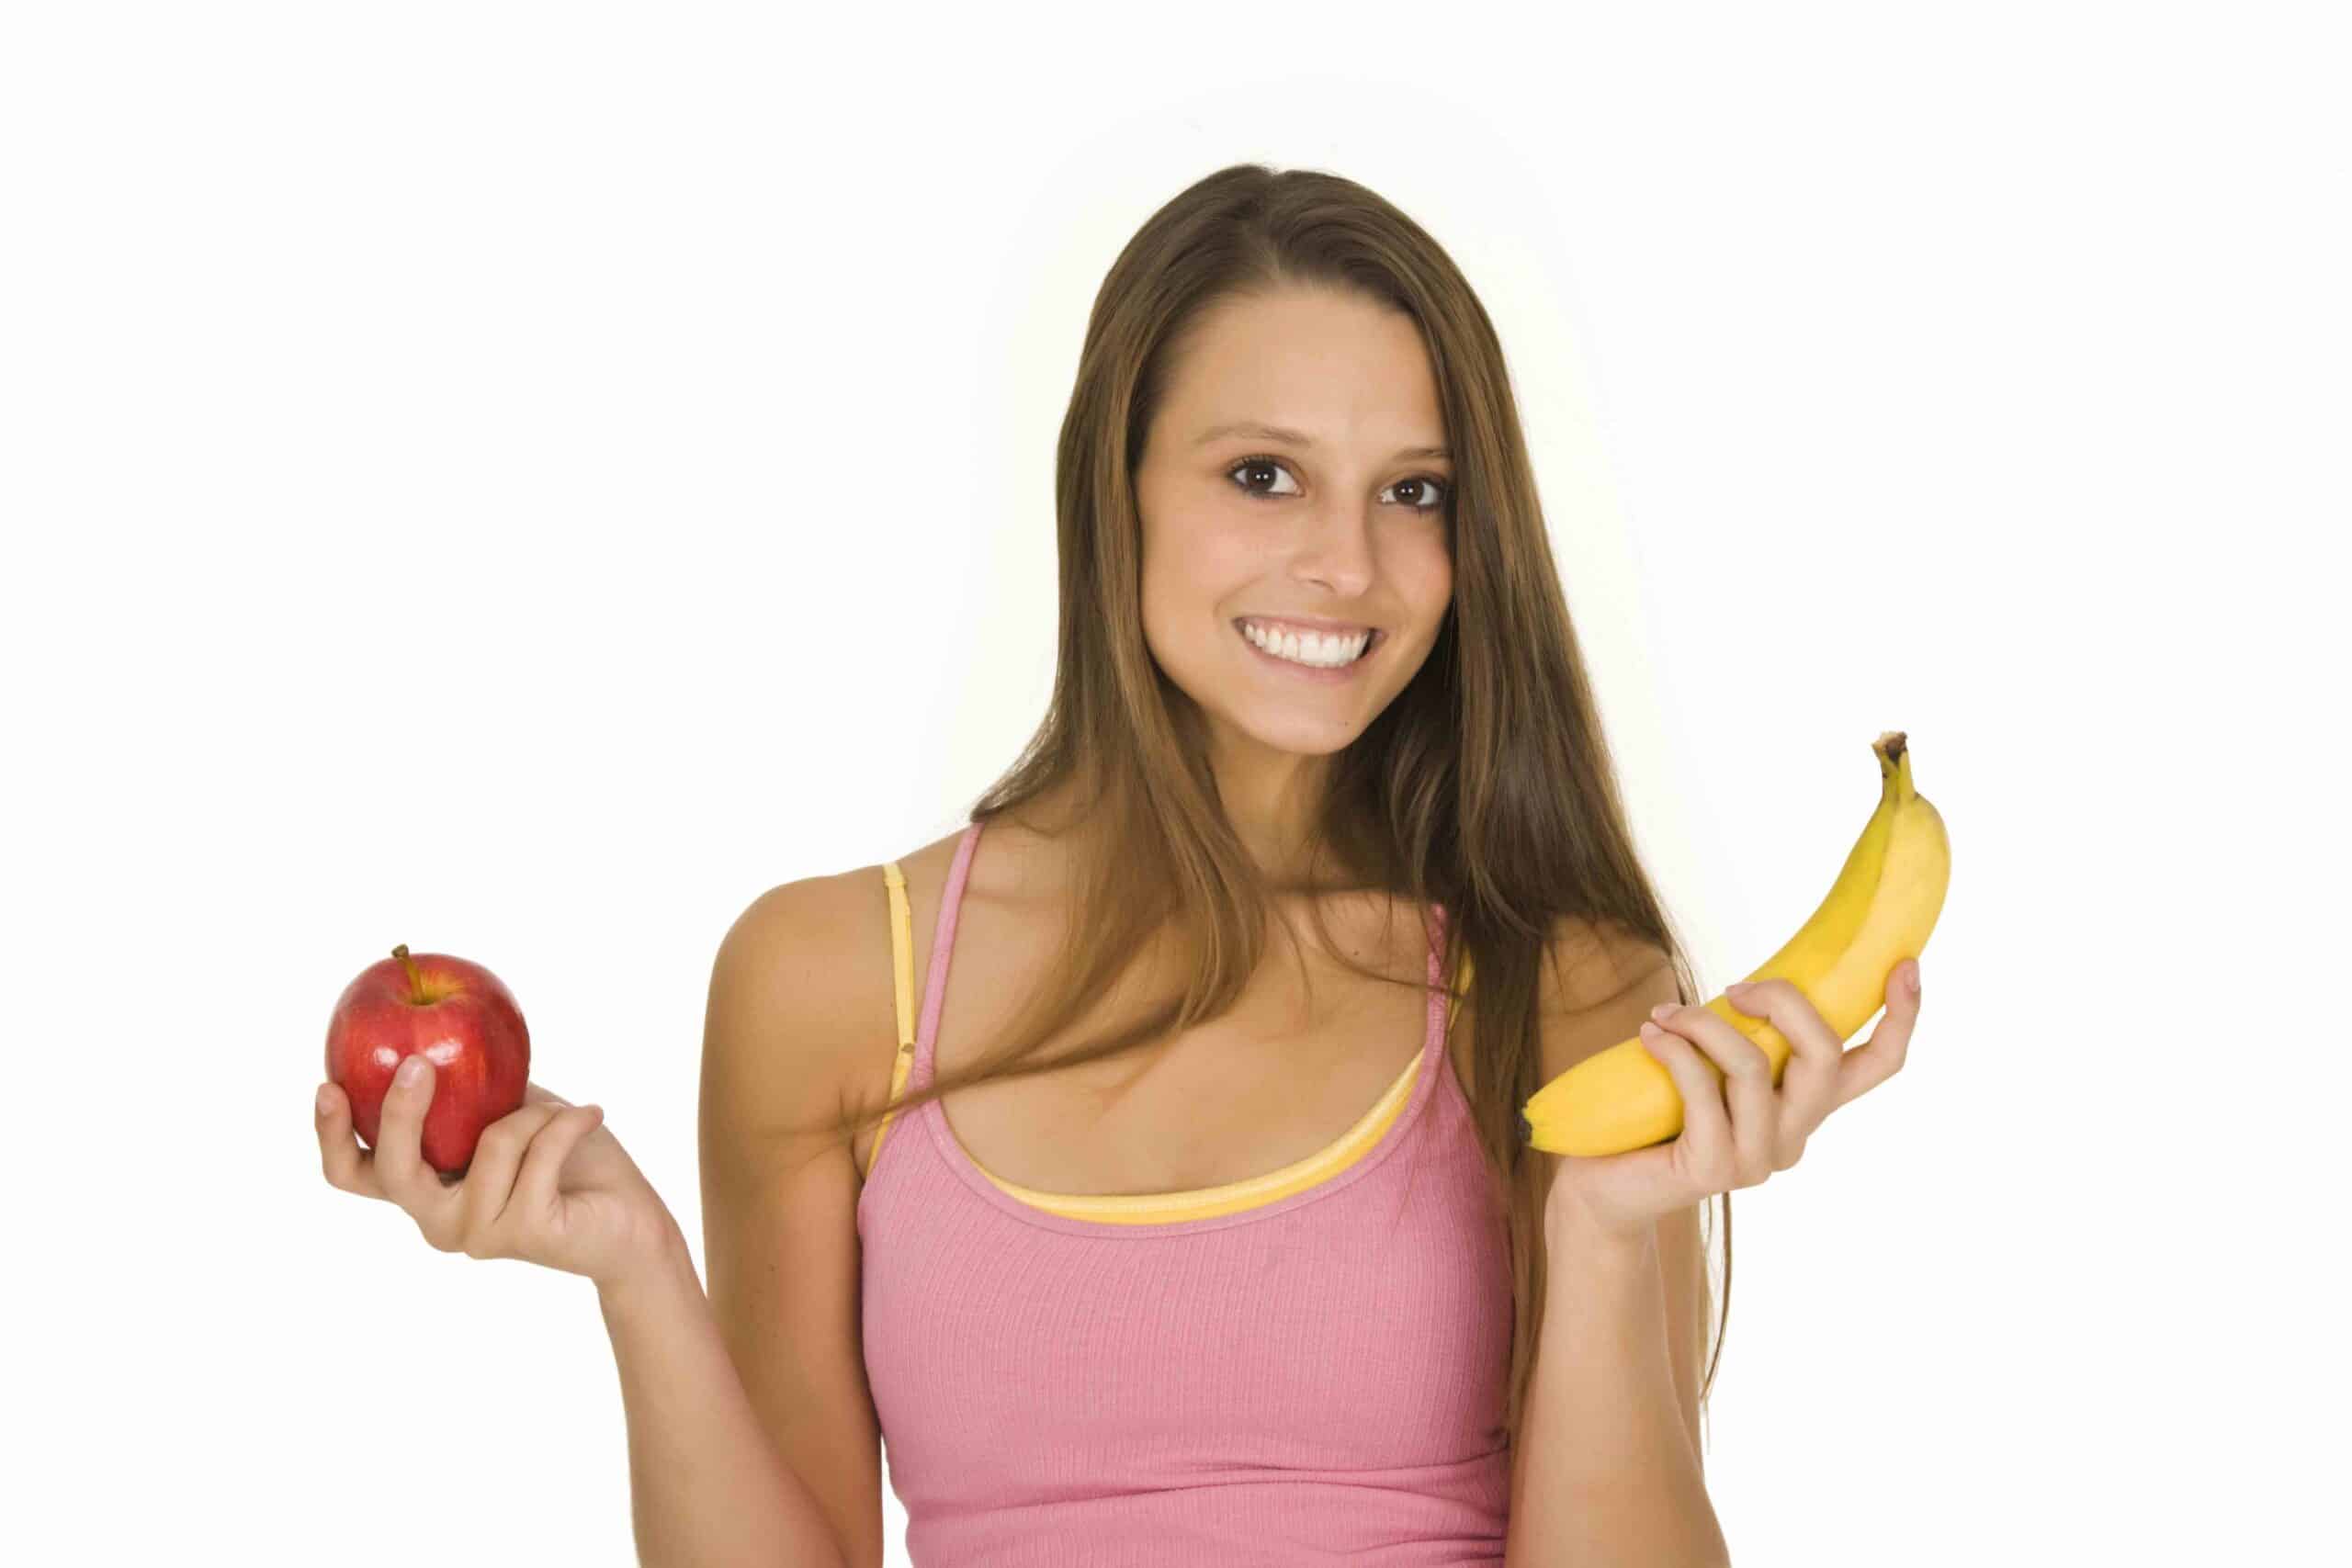 woman holding an apple and a banana trying to decide which one to eat